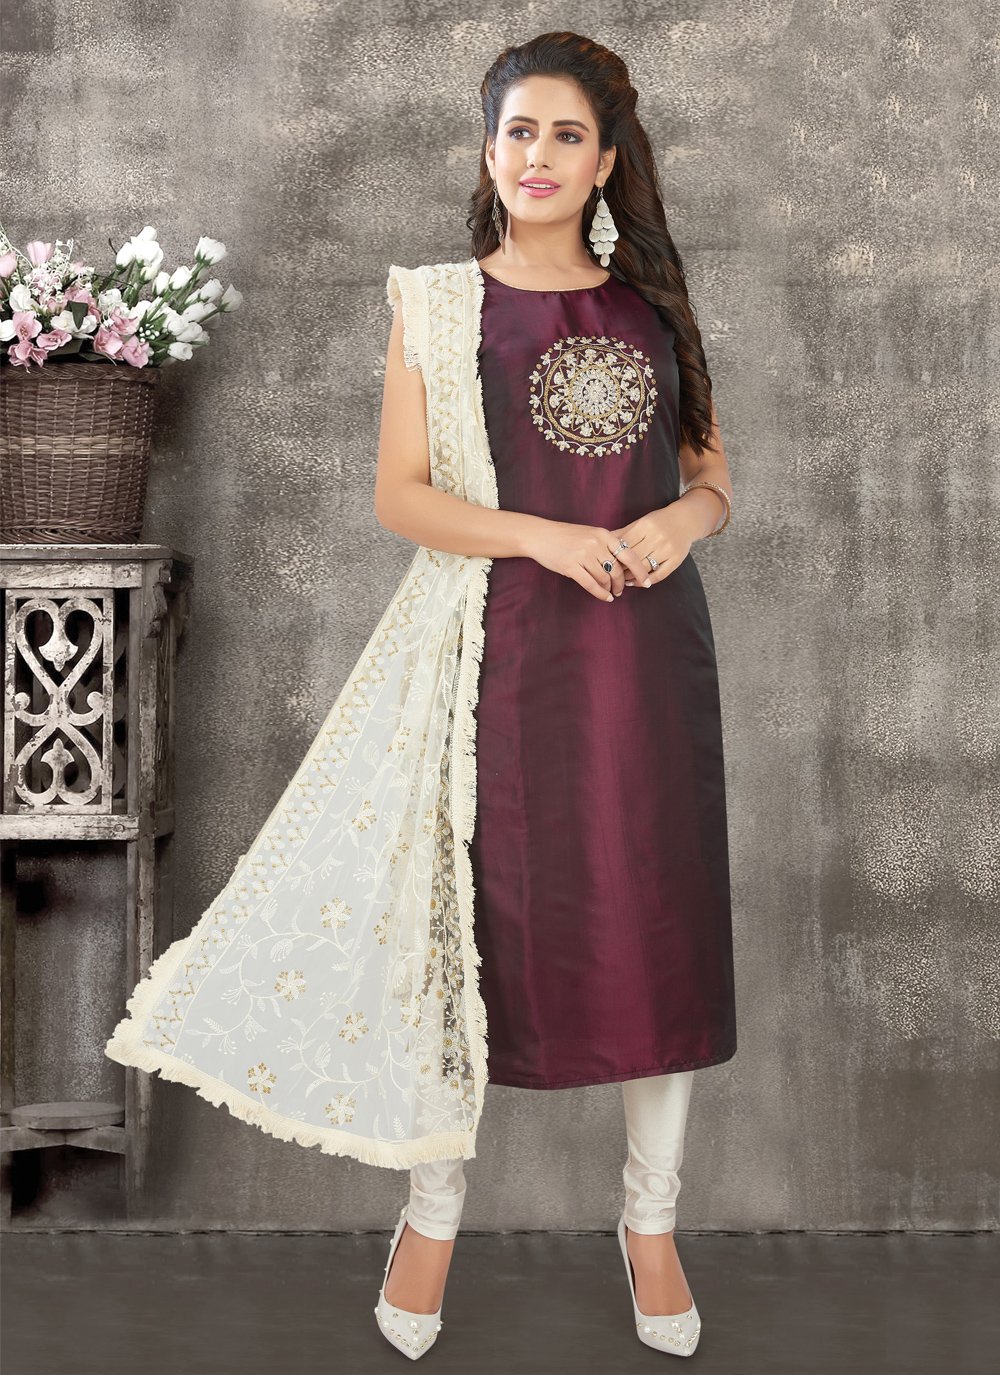 Wine Sequenced Sleeves Velvet Kurti With Salwar And Blush Pink Dupatta at  Rs 5299.00 | Bollywood Designer Suit, Designer Suits, Ladies Fancy Suit,  Designer Cotton Suit, Bollywood Salwar Kameez - Anokherang Collections